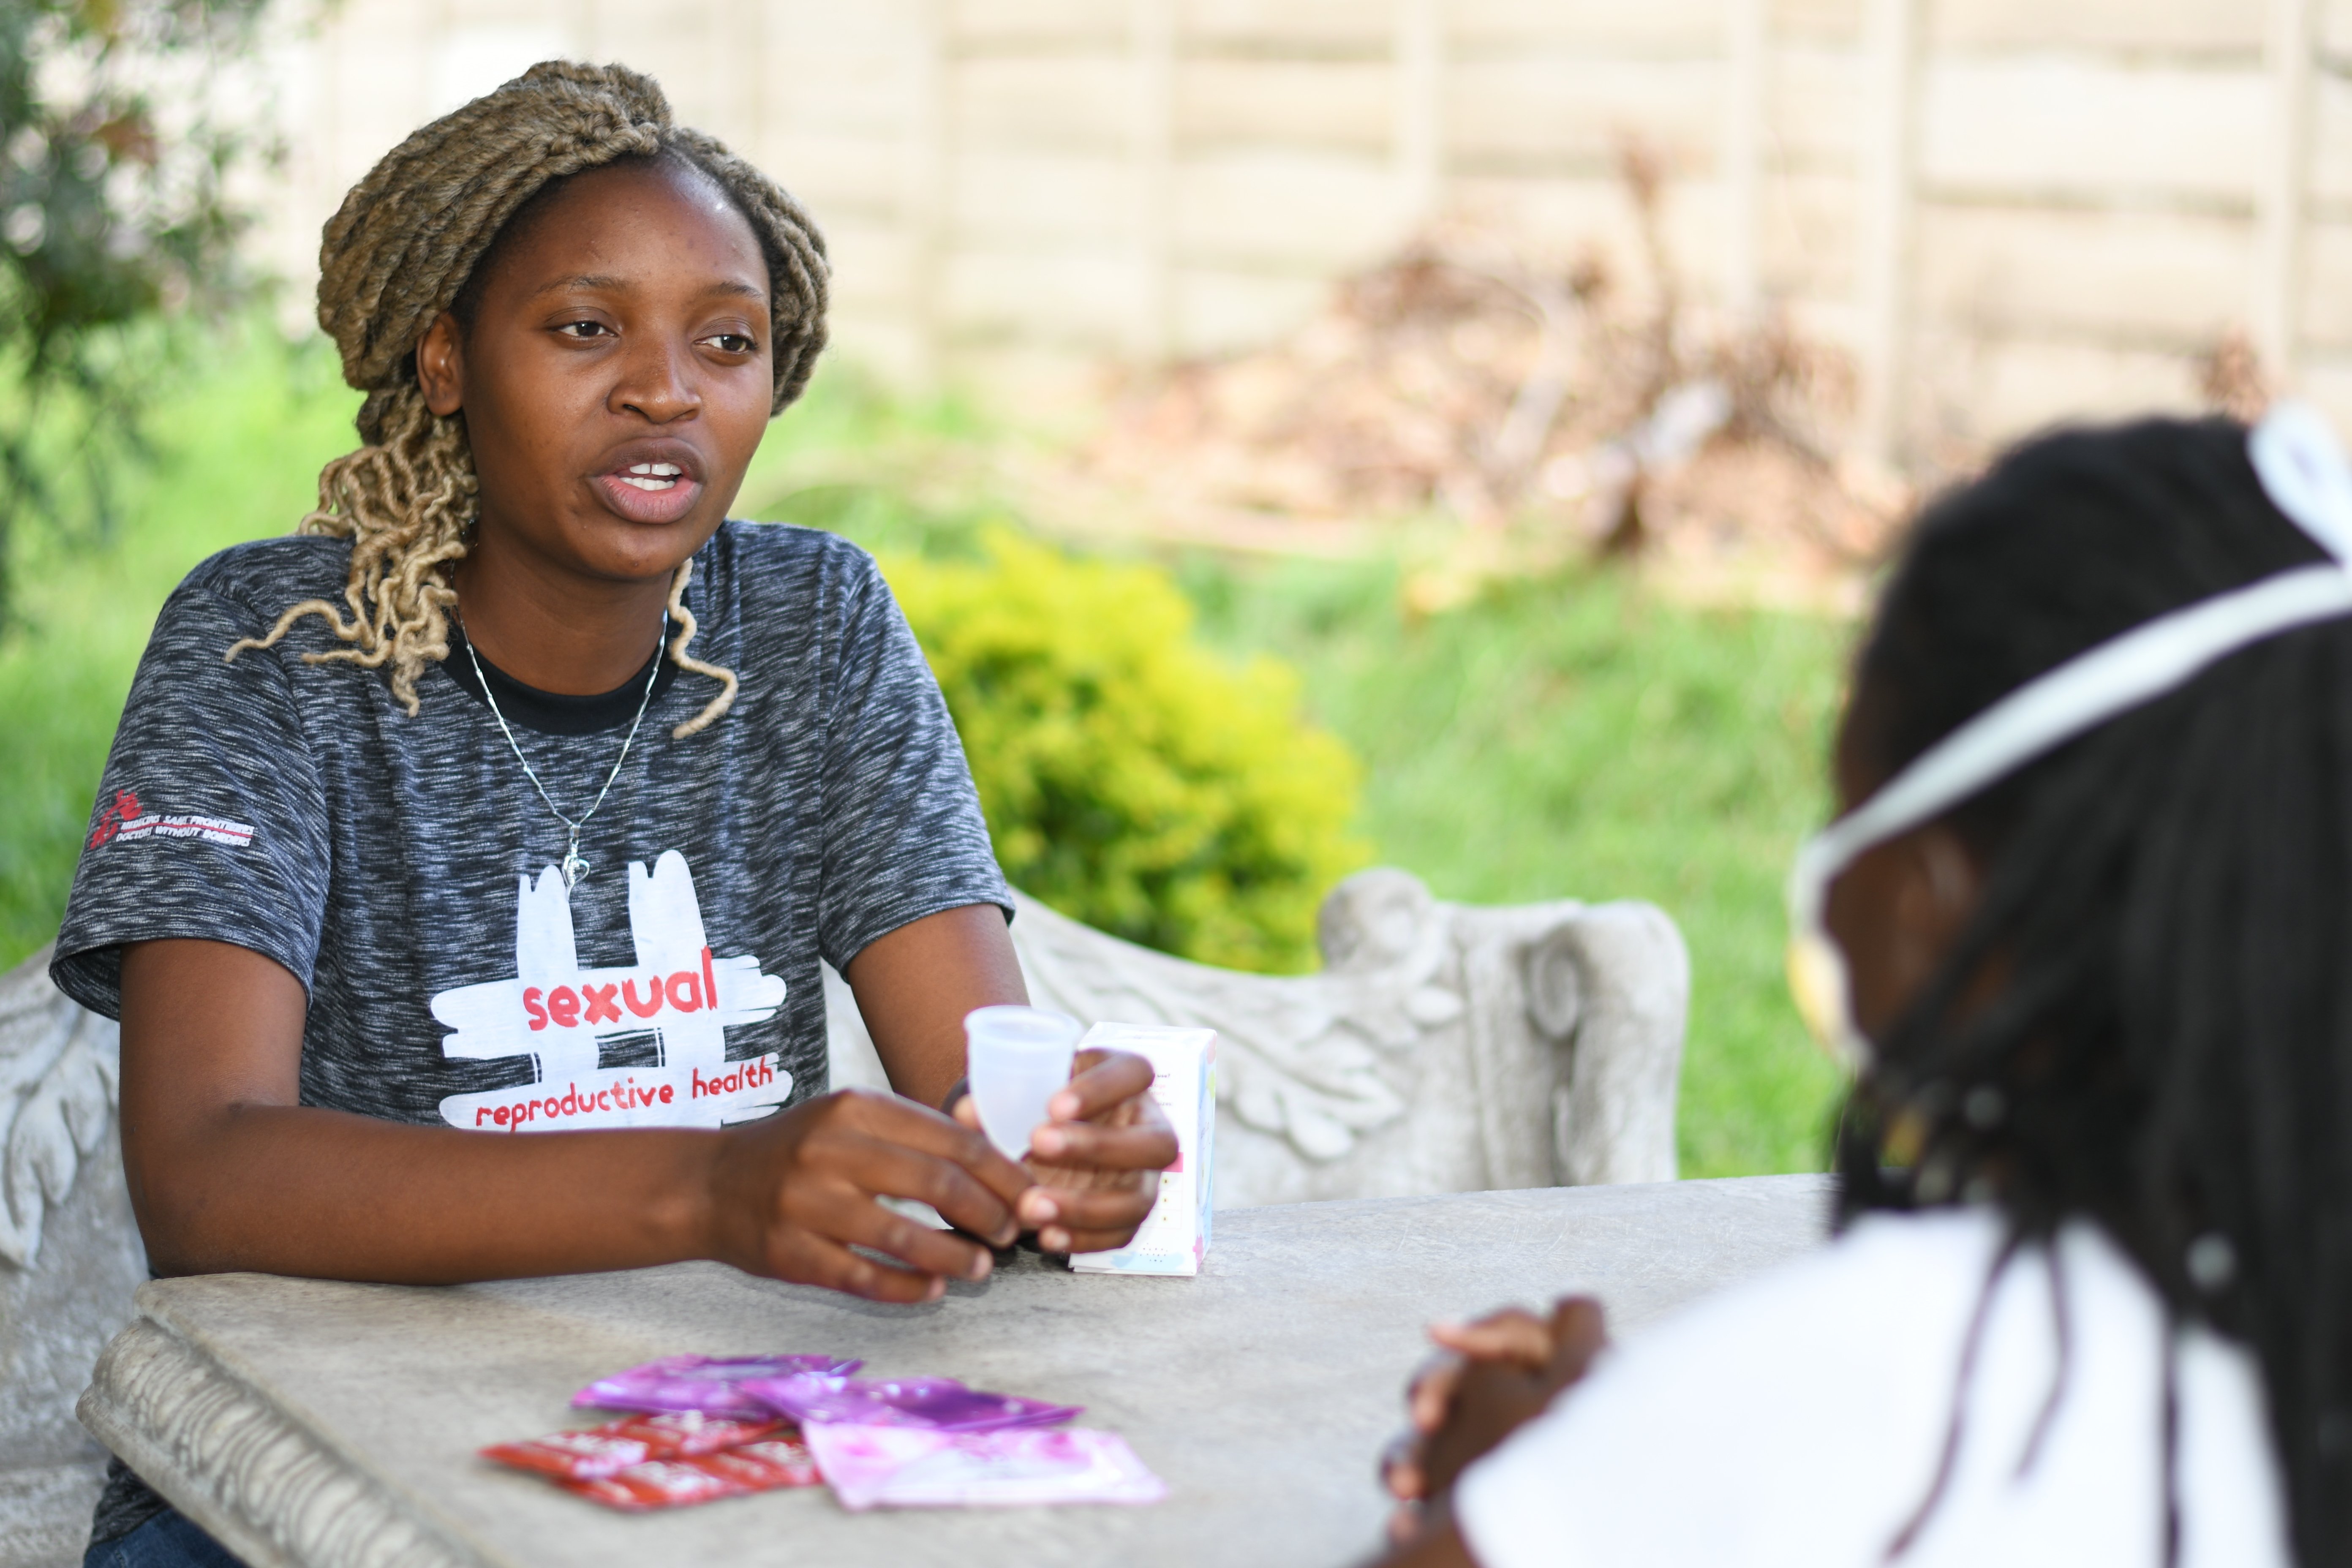 Peer educator having a discussion with young women.